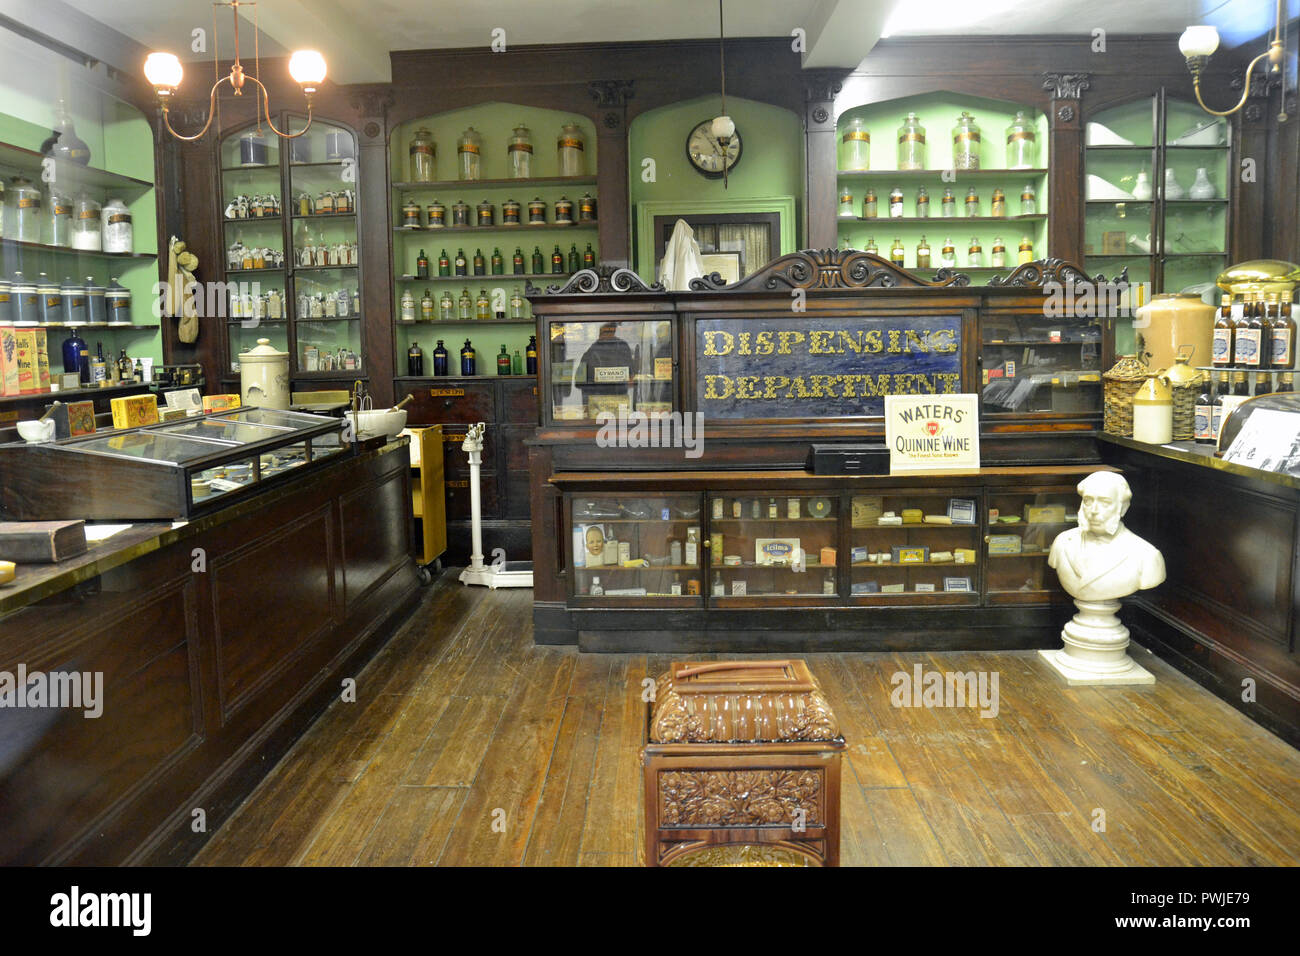 The Victorian Apothecary, Steward's Chemist Shop, at Worcester Museum and Art Gallery, Worcester, England, UK Stock Photo